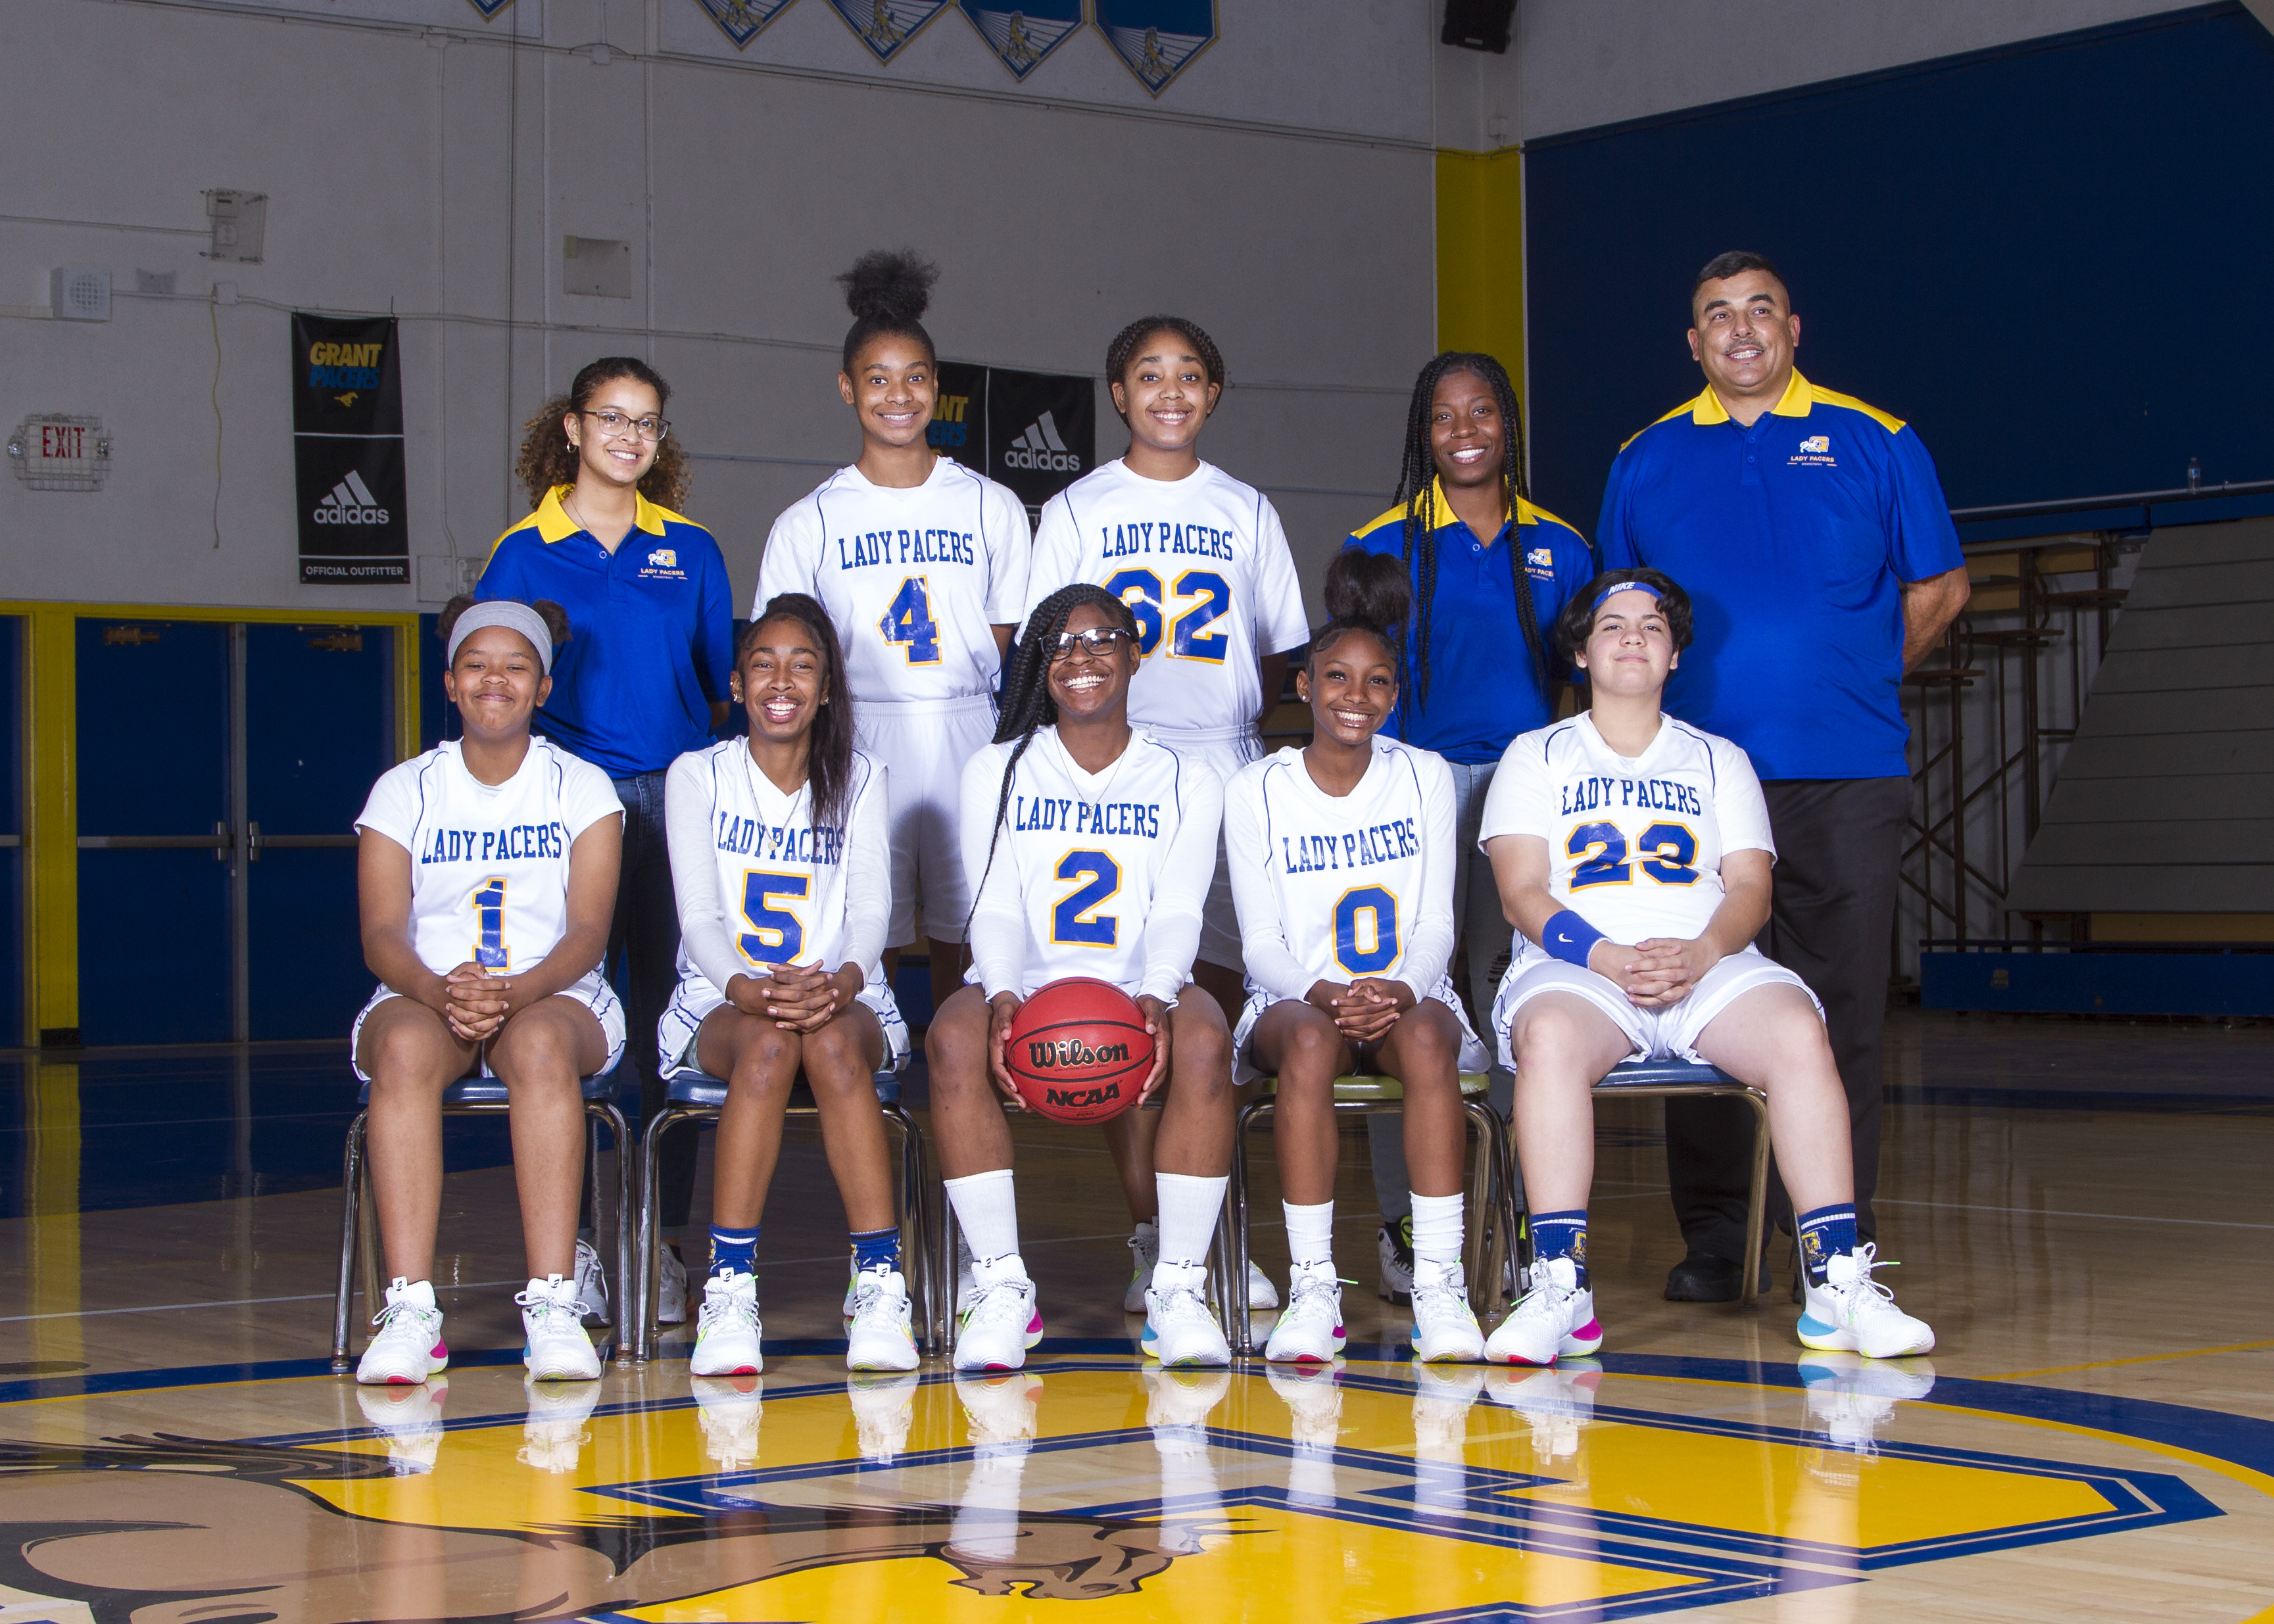 Grant Union High School JV Lady Pacers